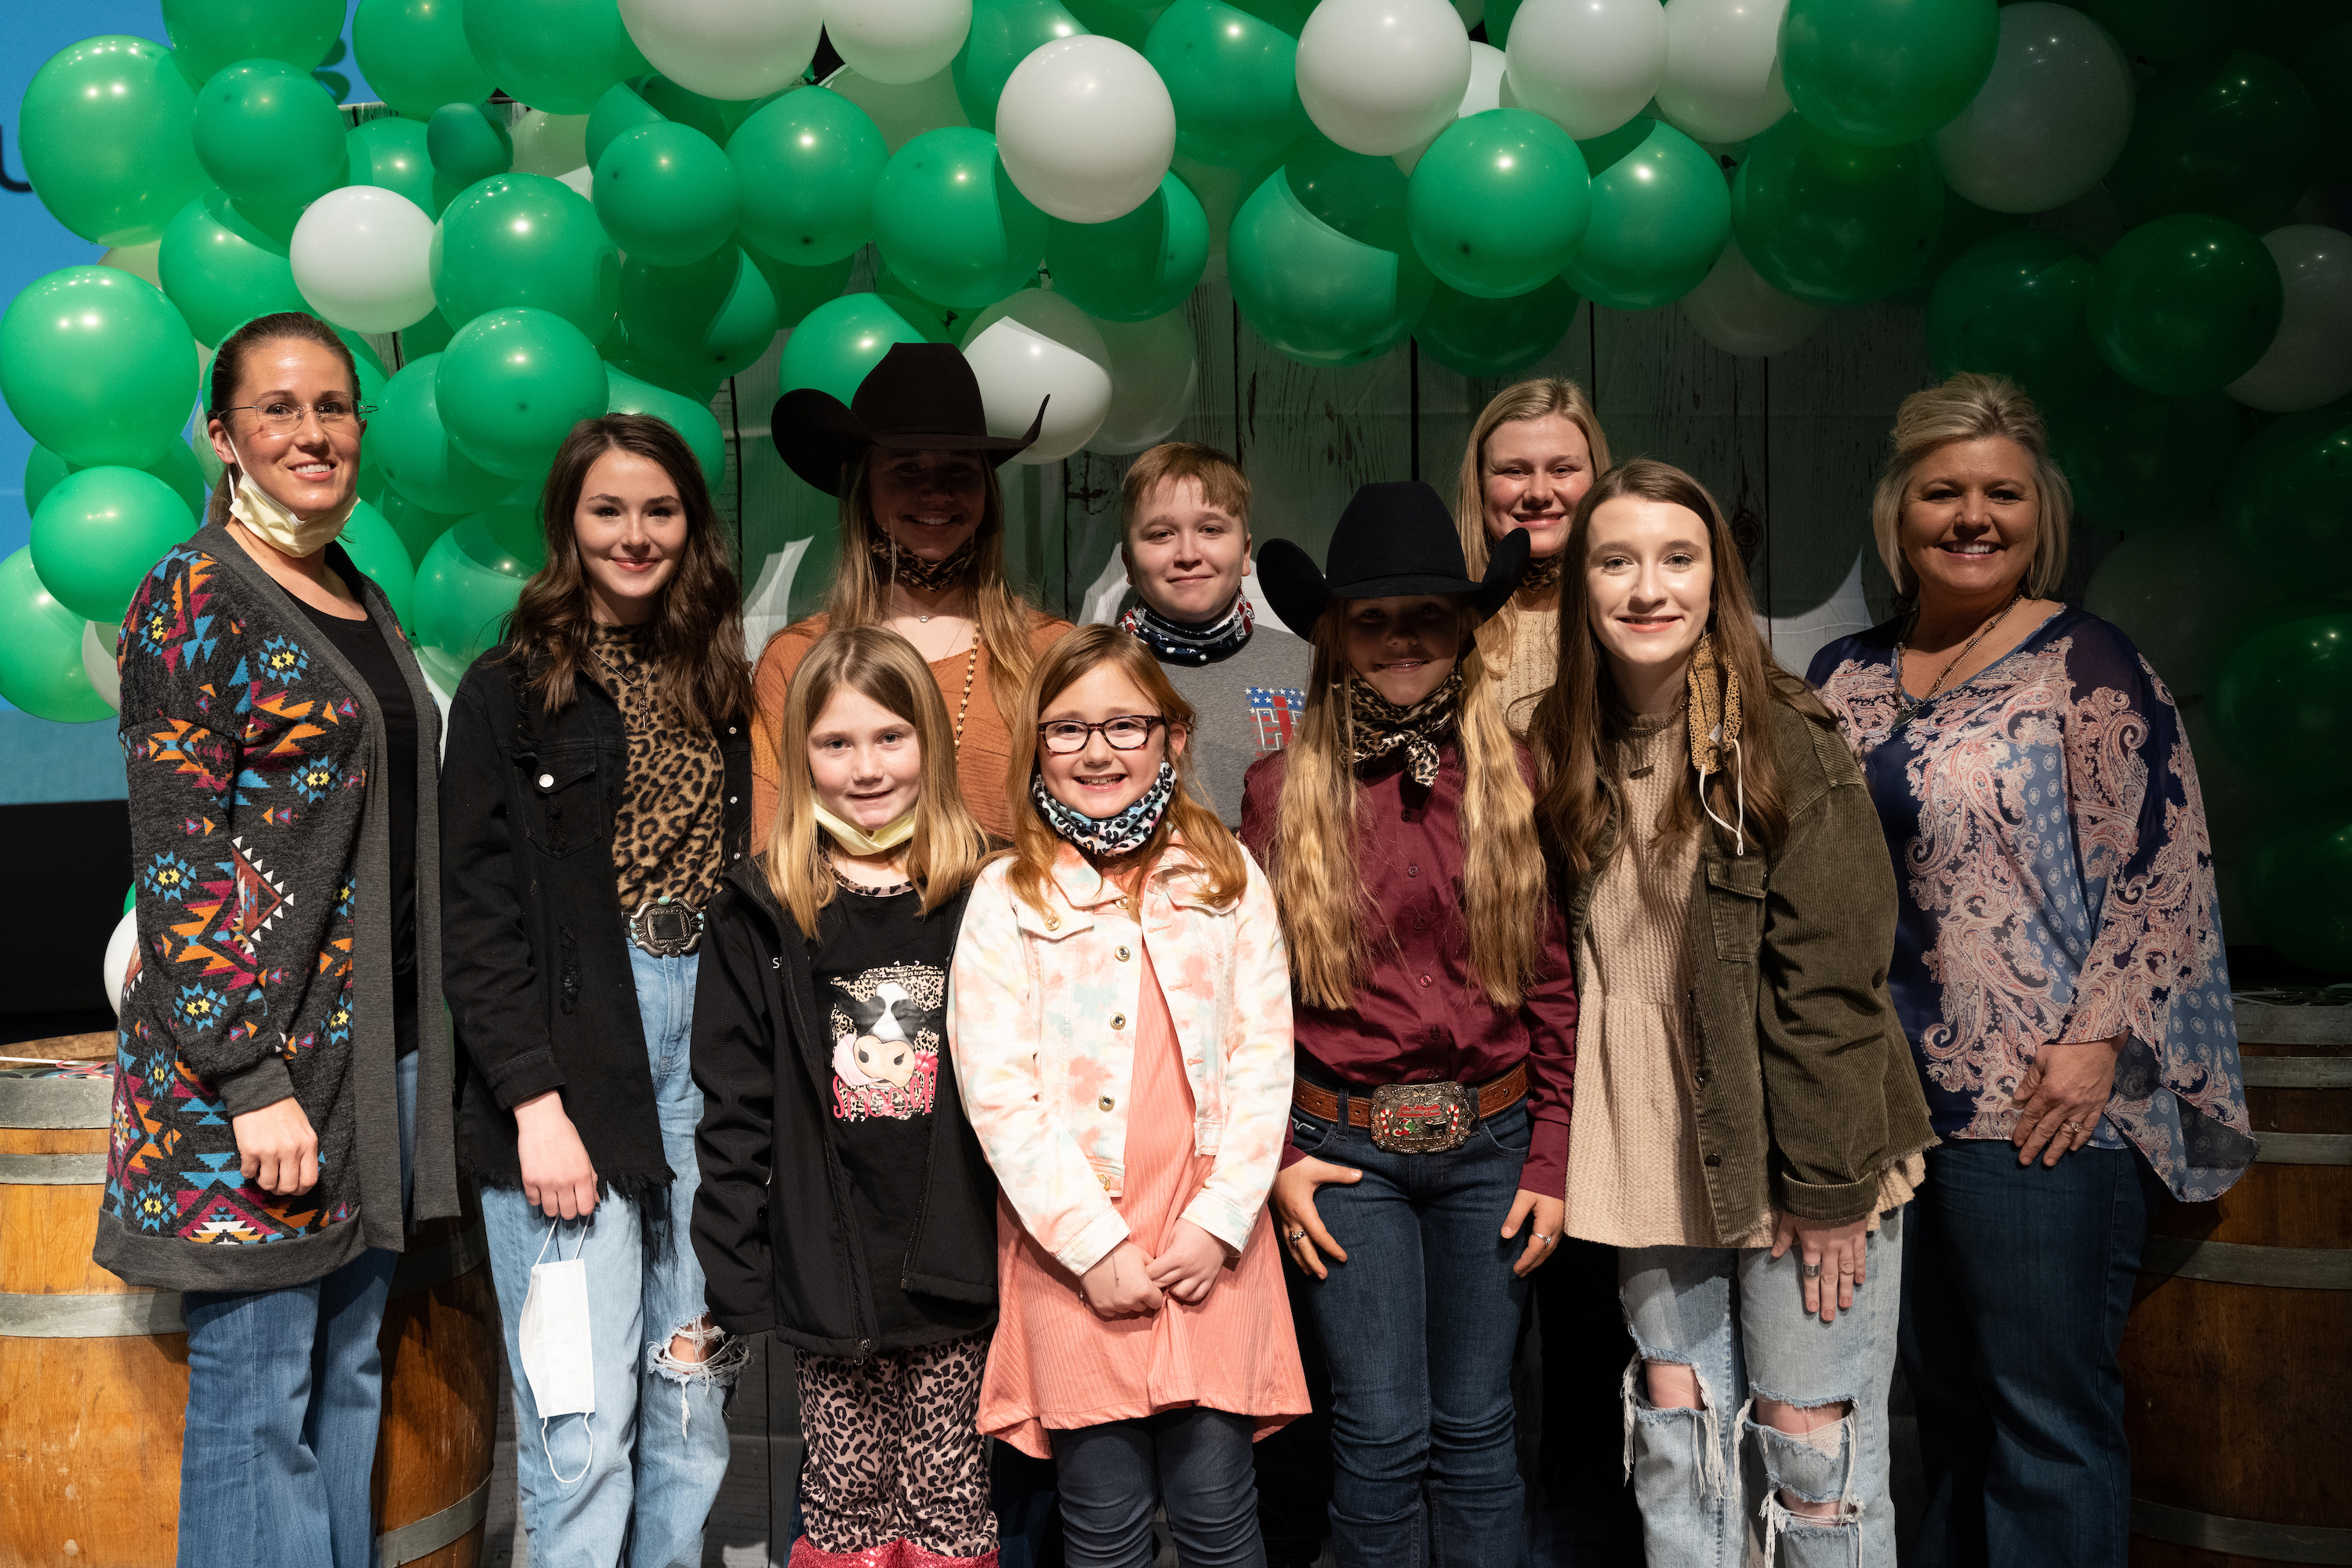 Members and leaders of the Livestock 4-H Club pose together at 4-H Achievement Night.